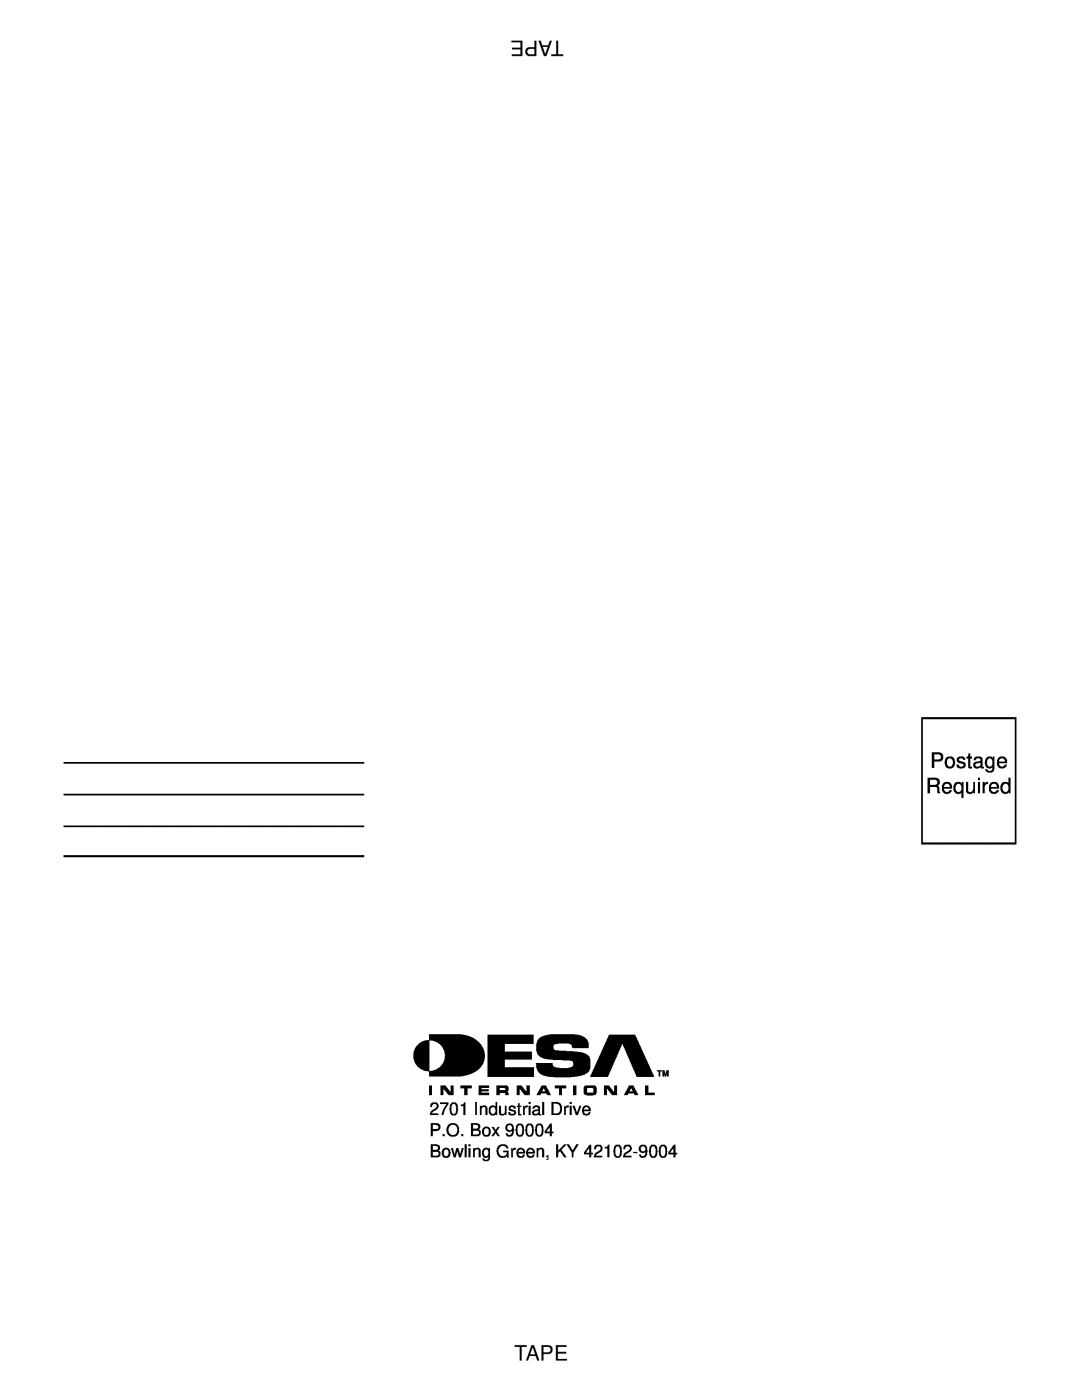 Desa EFP33NR, EFP33PR installation manual Tape, Postage Required, Industrial Drive P.O. Box Bowling Green, KY 